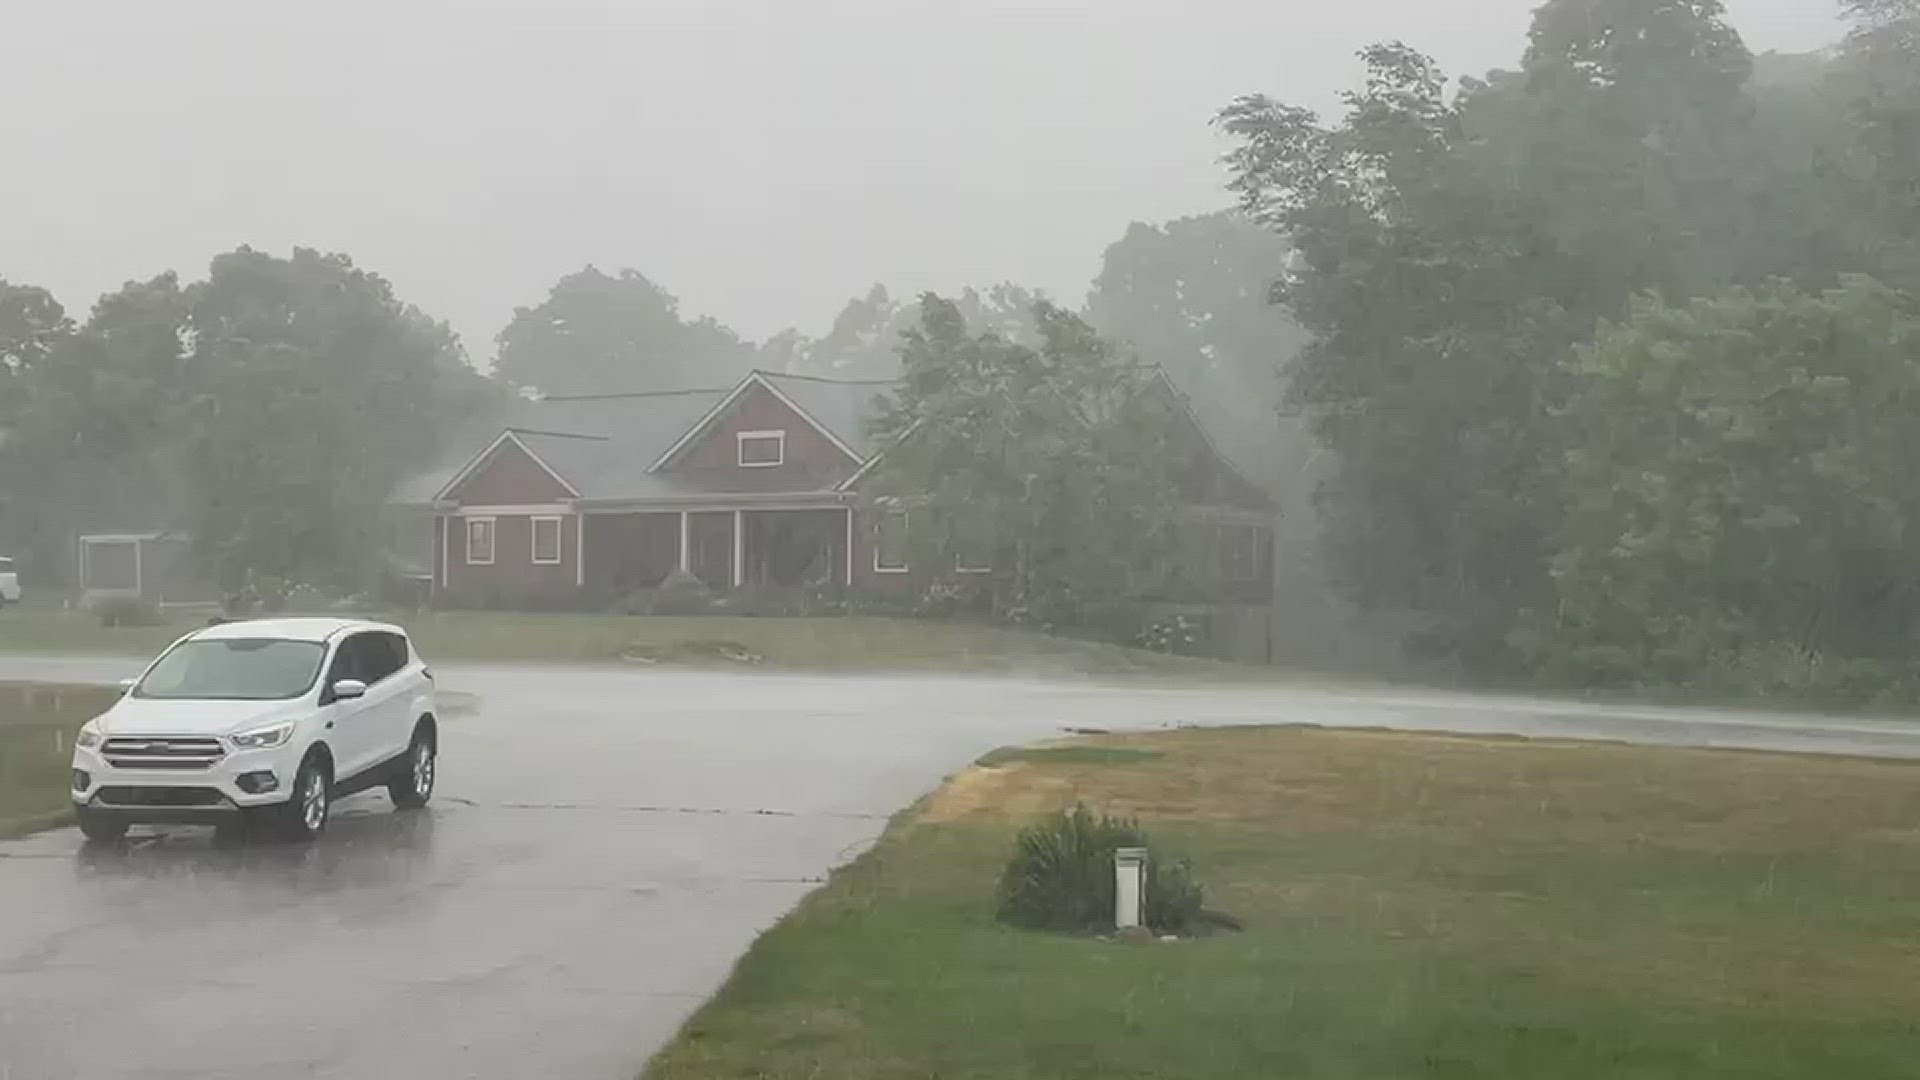 13 ON YOUR SIDE Photojournalist Kenny Ritz captured the rain coming down in Leighton Township.